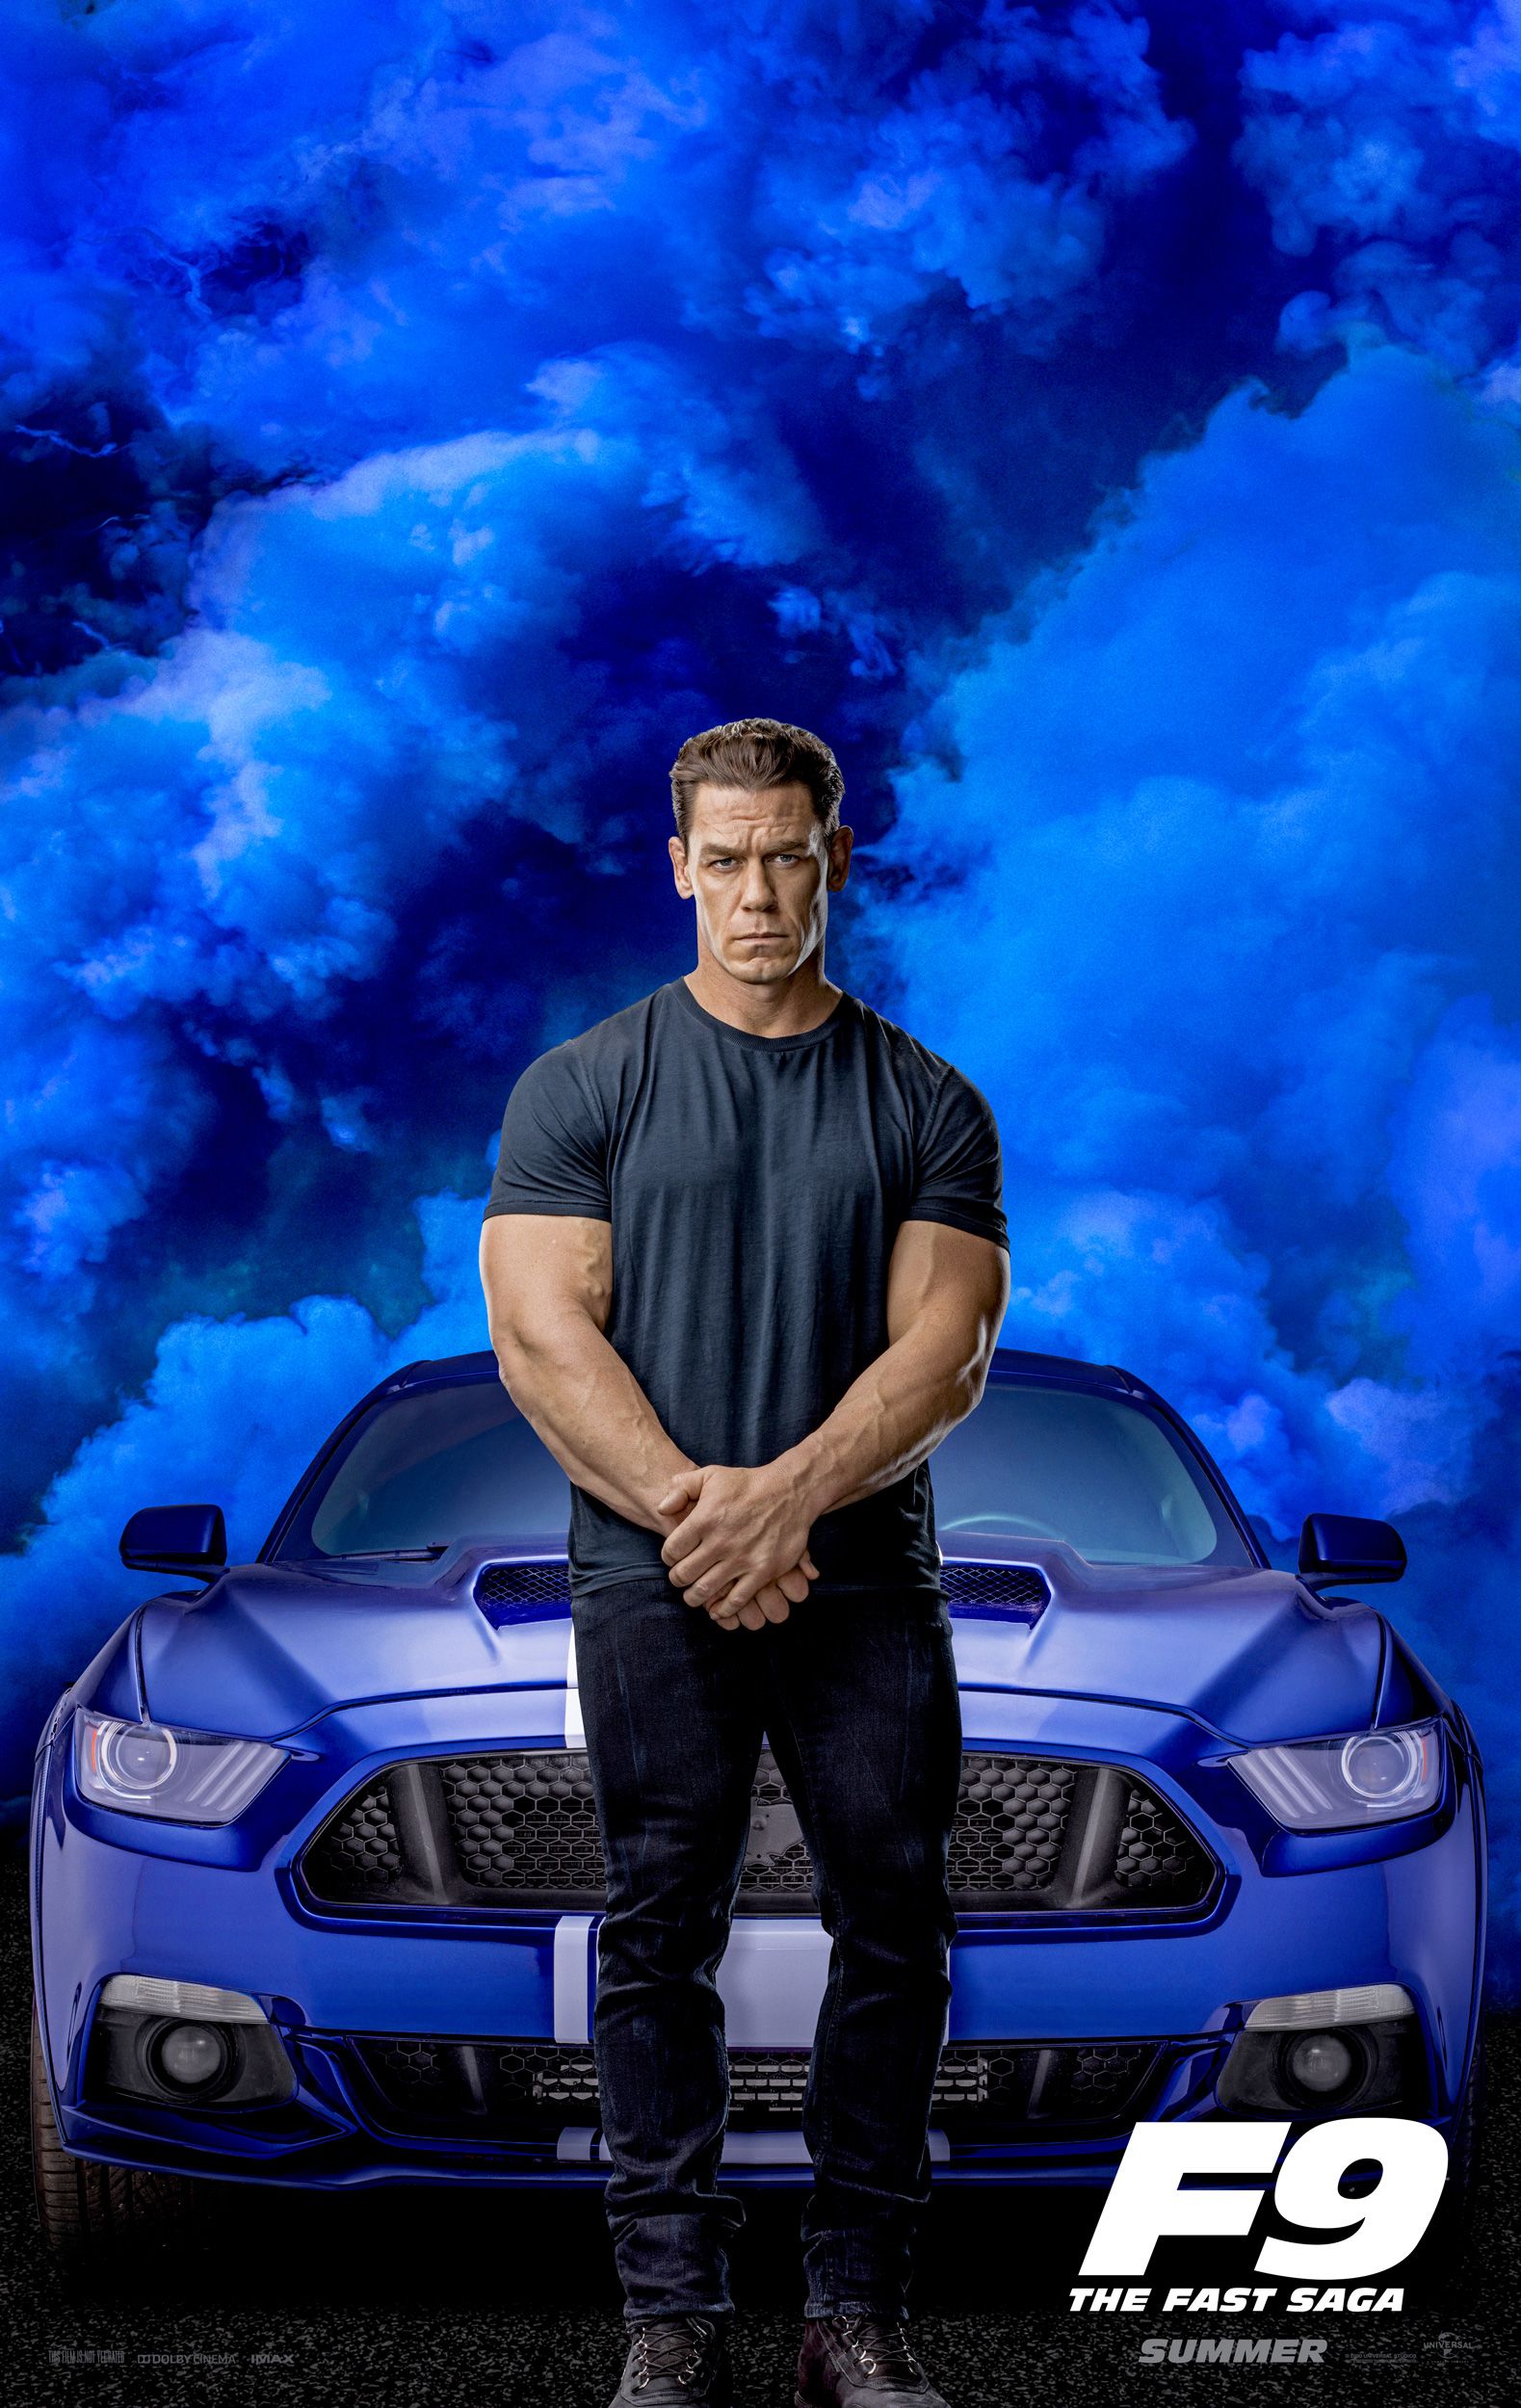 Image result for john cena poster fast and furious 9